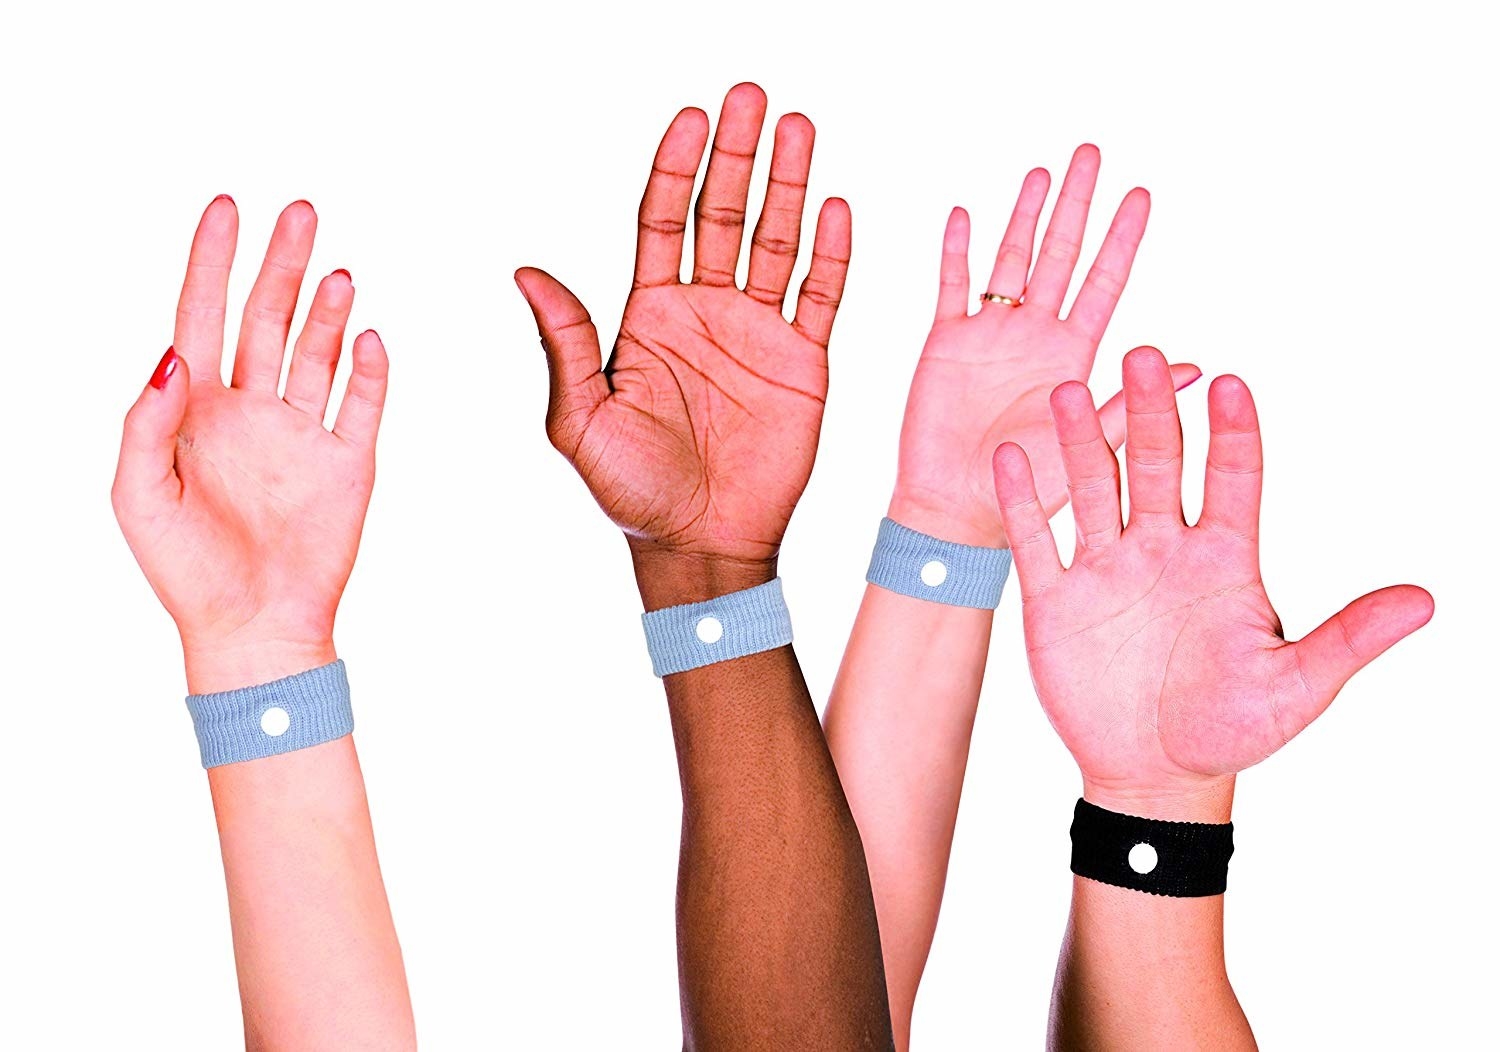 hands with bracelets with white circles 